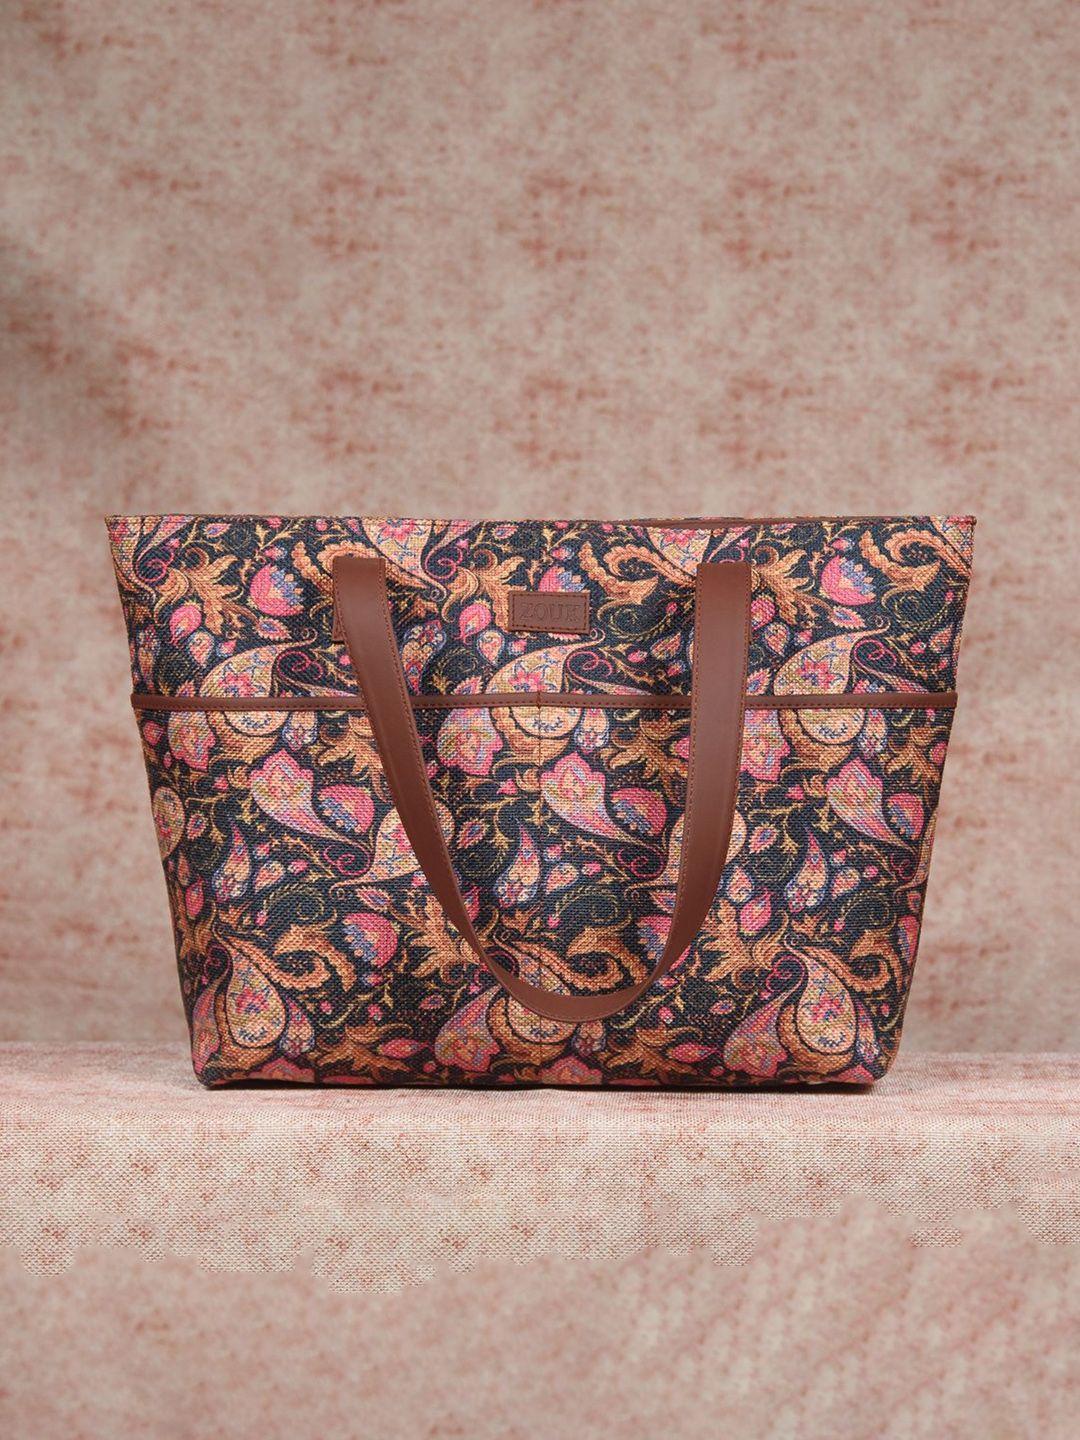 ZOUK Multicoloured Printed Sustainable Tote Bag